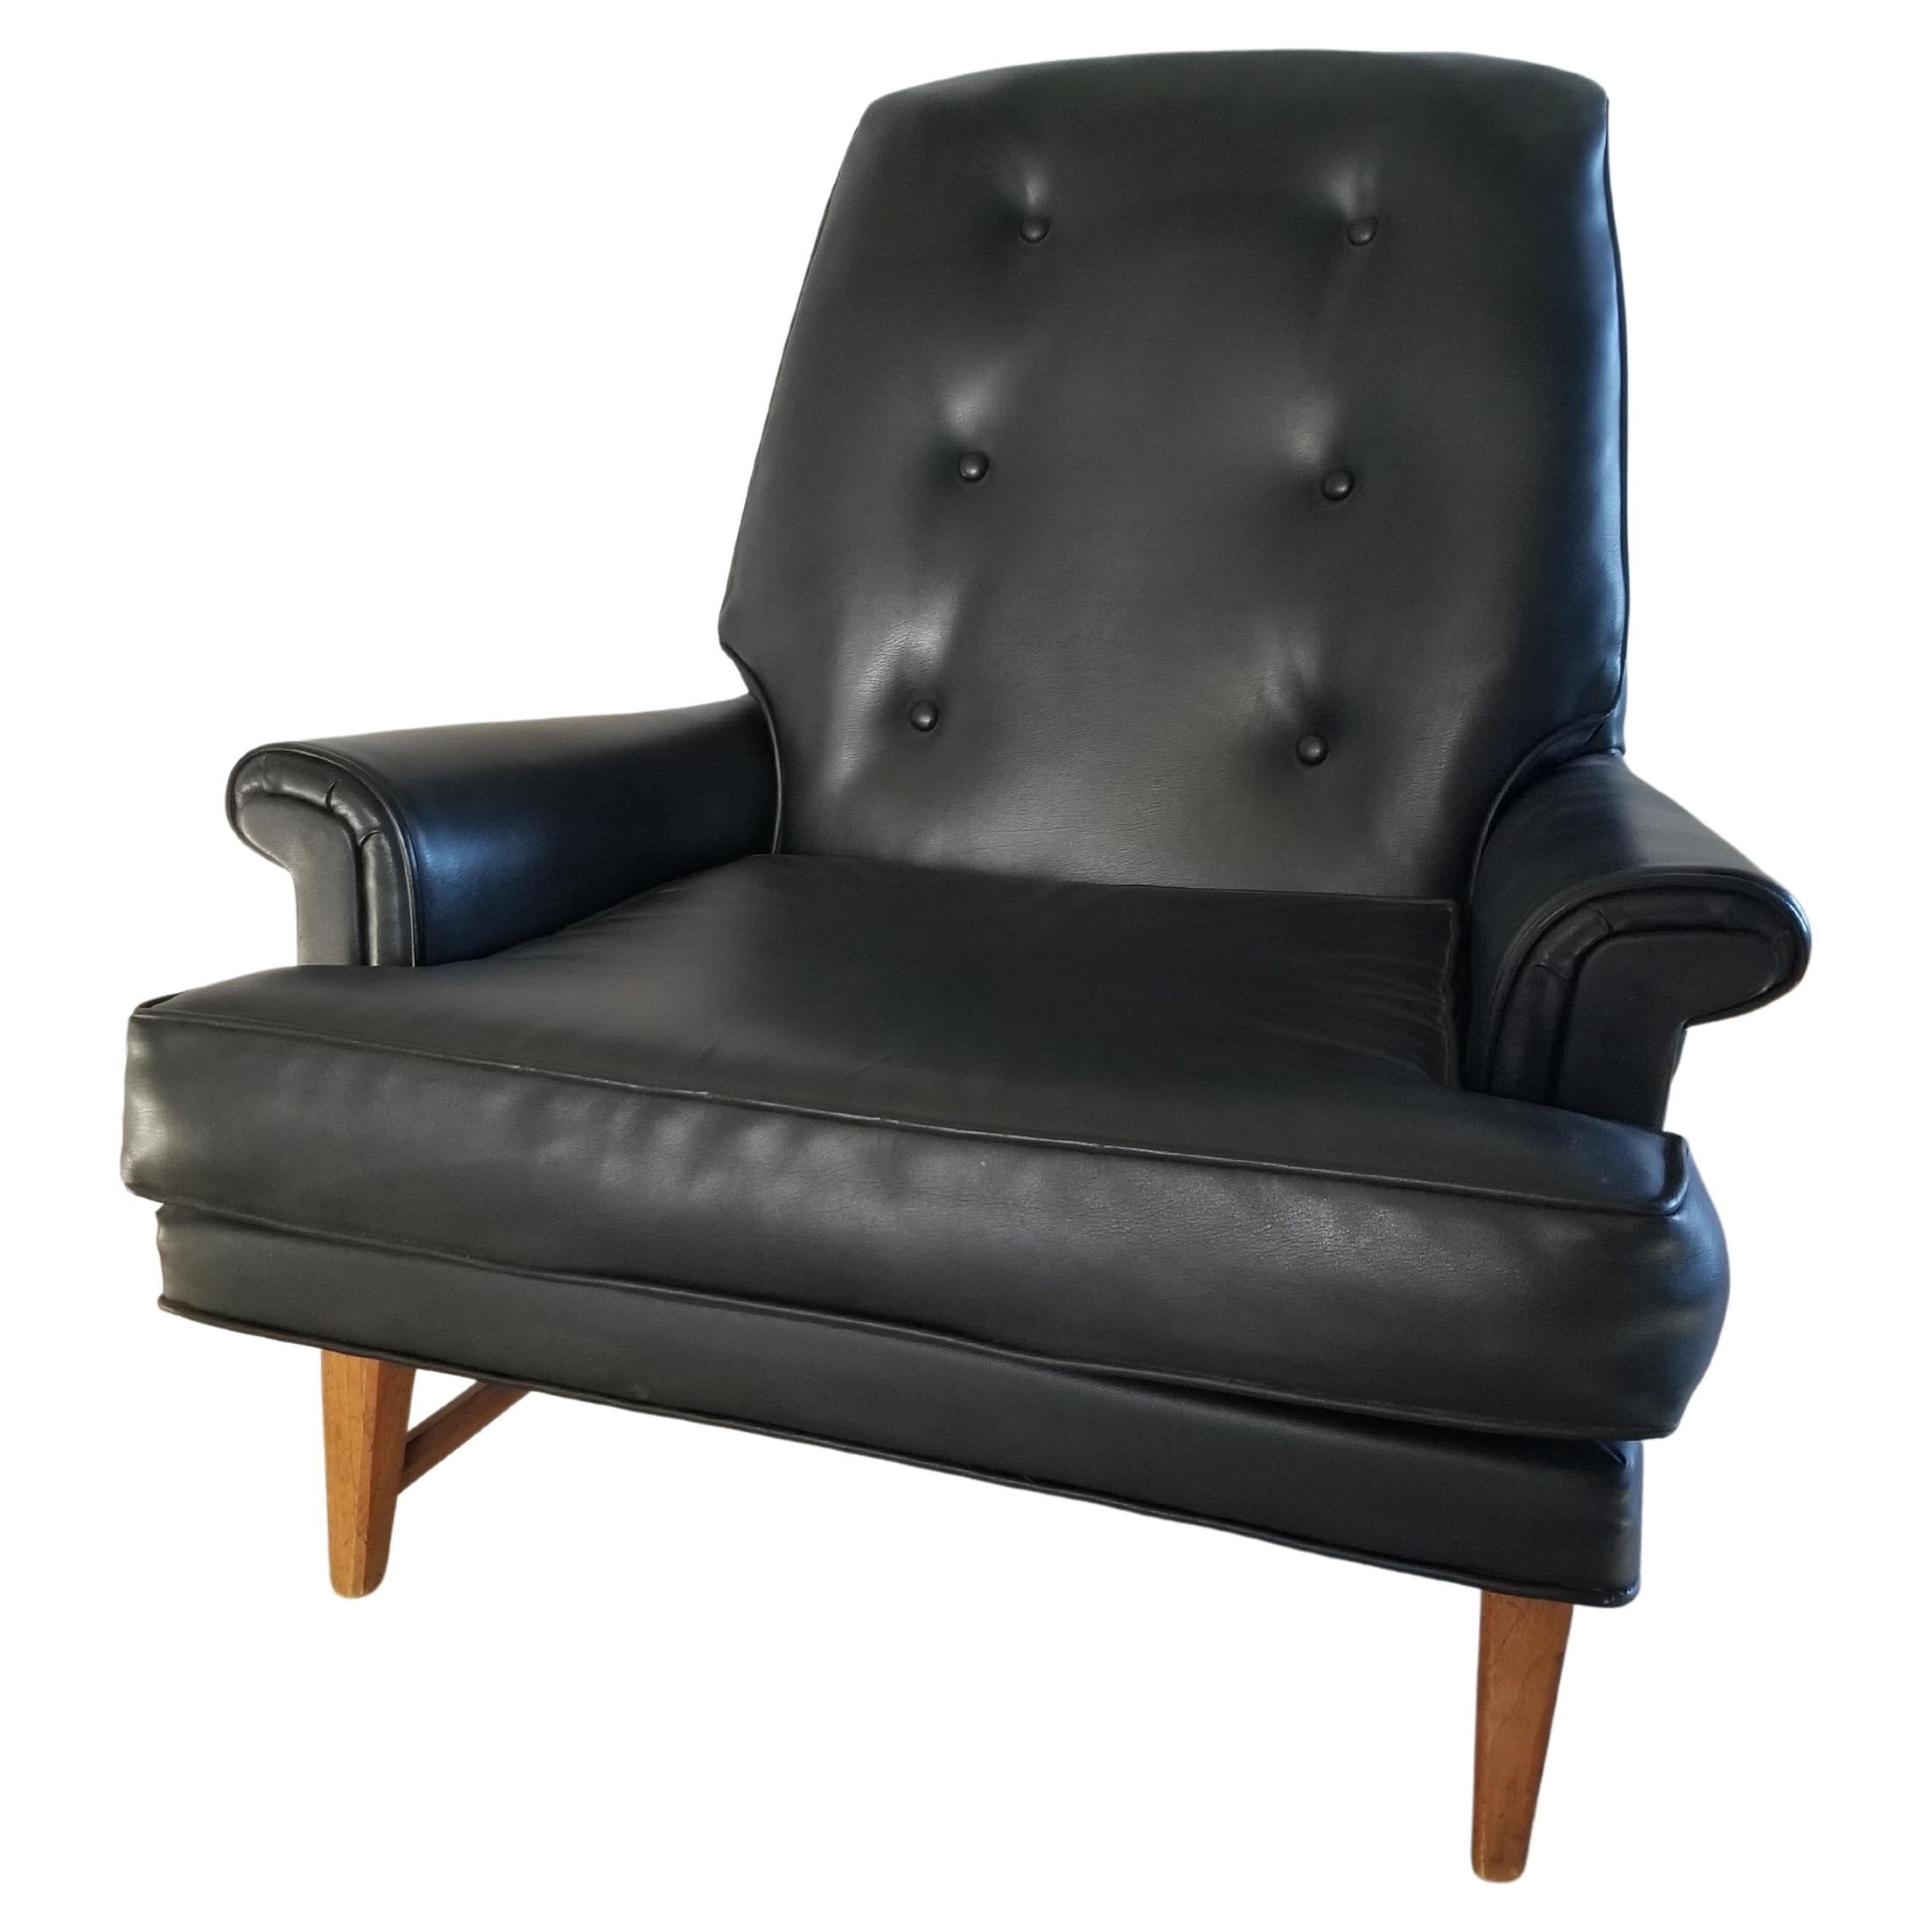 1950s Heritage Faux Leather Mahogany Lounge Chair